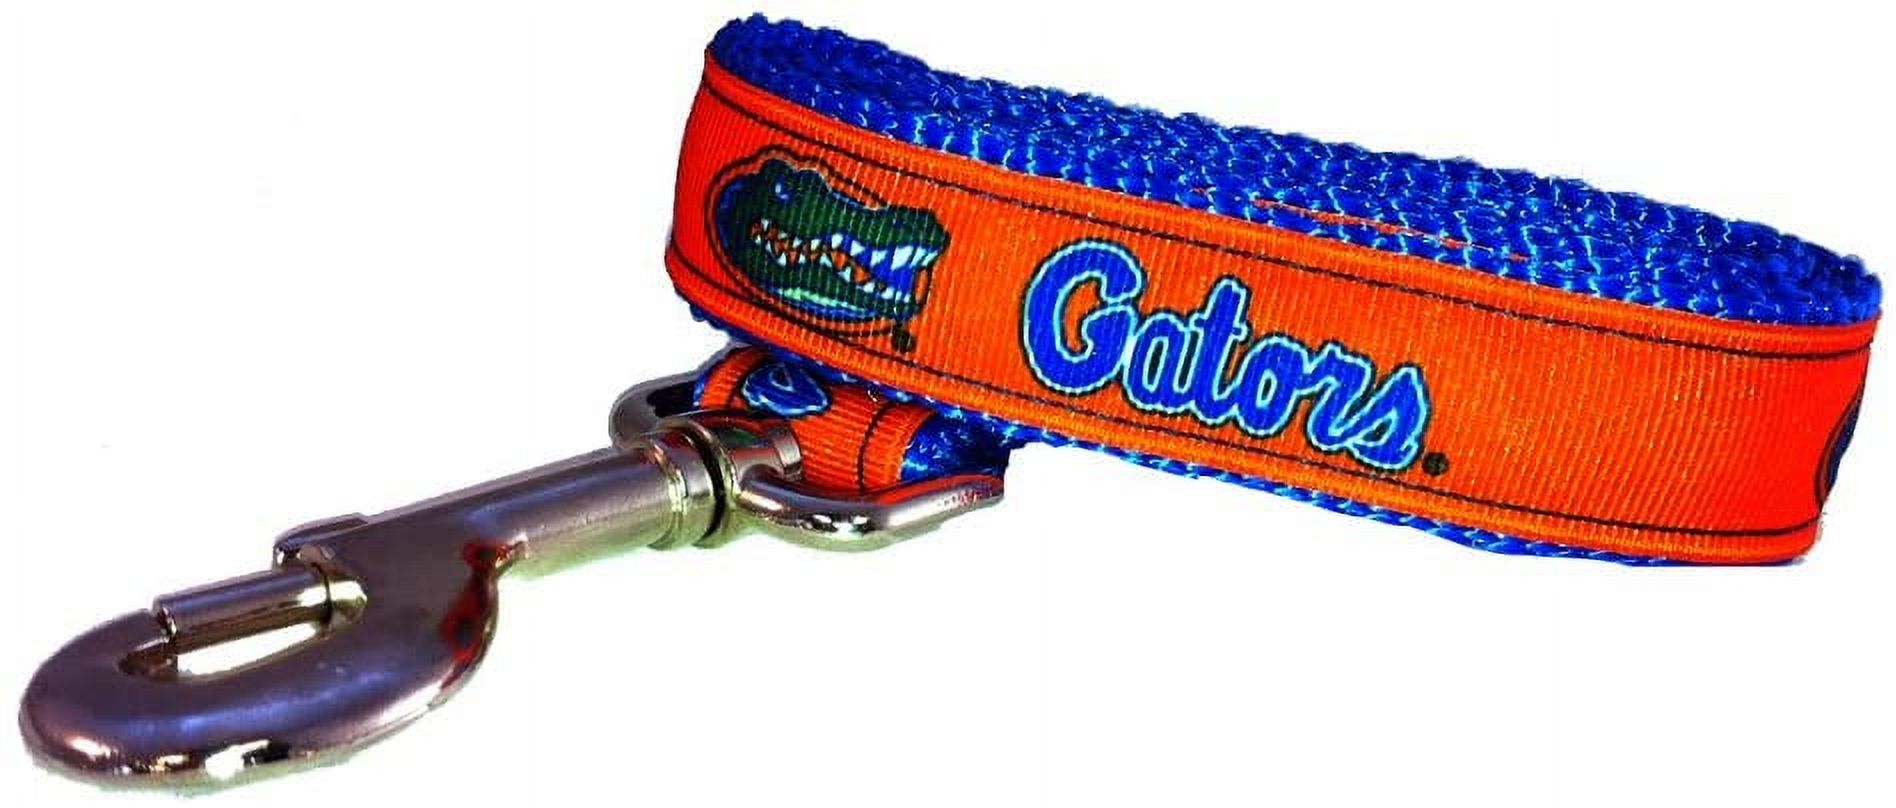 Brand New Florida X-Small Pet Dog Collar(3/4 Inch Wide, 6-12 Inch Long), and Small Leash(5/8 Inch Wide, 6 Feet Long) Bundle, Official Gators Logo/Colors - image 2 of 3